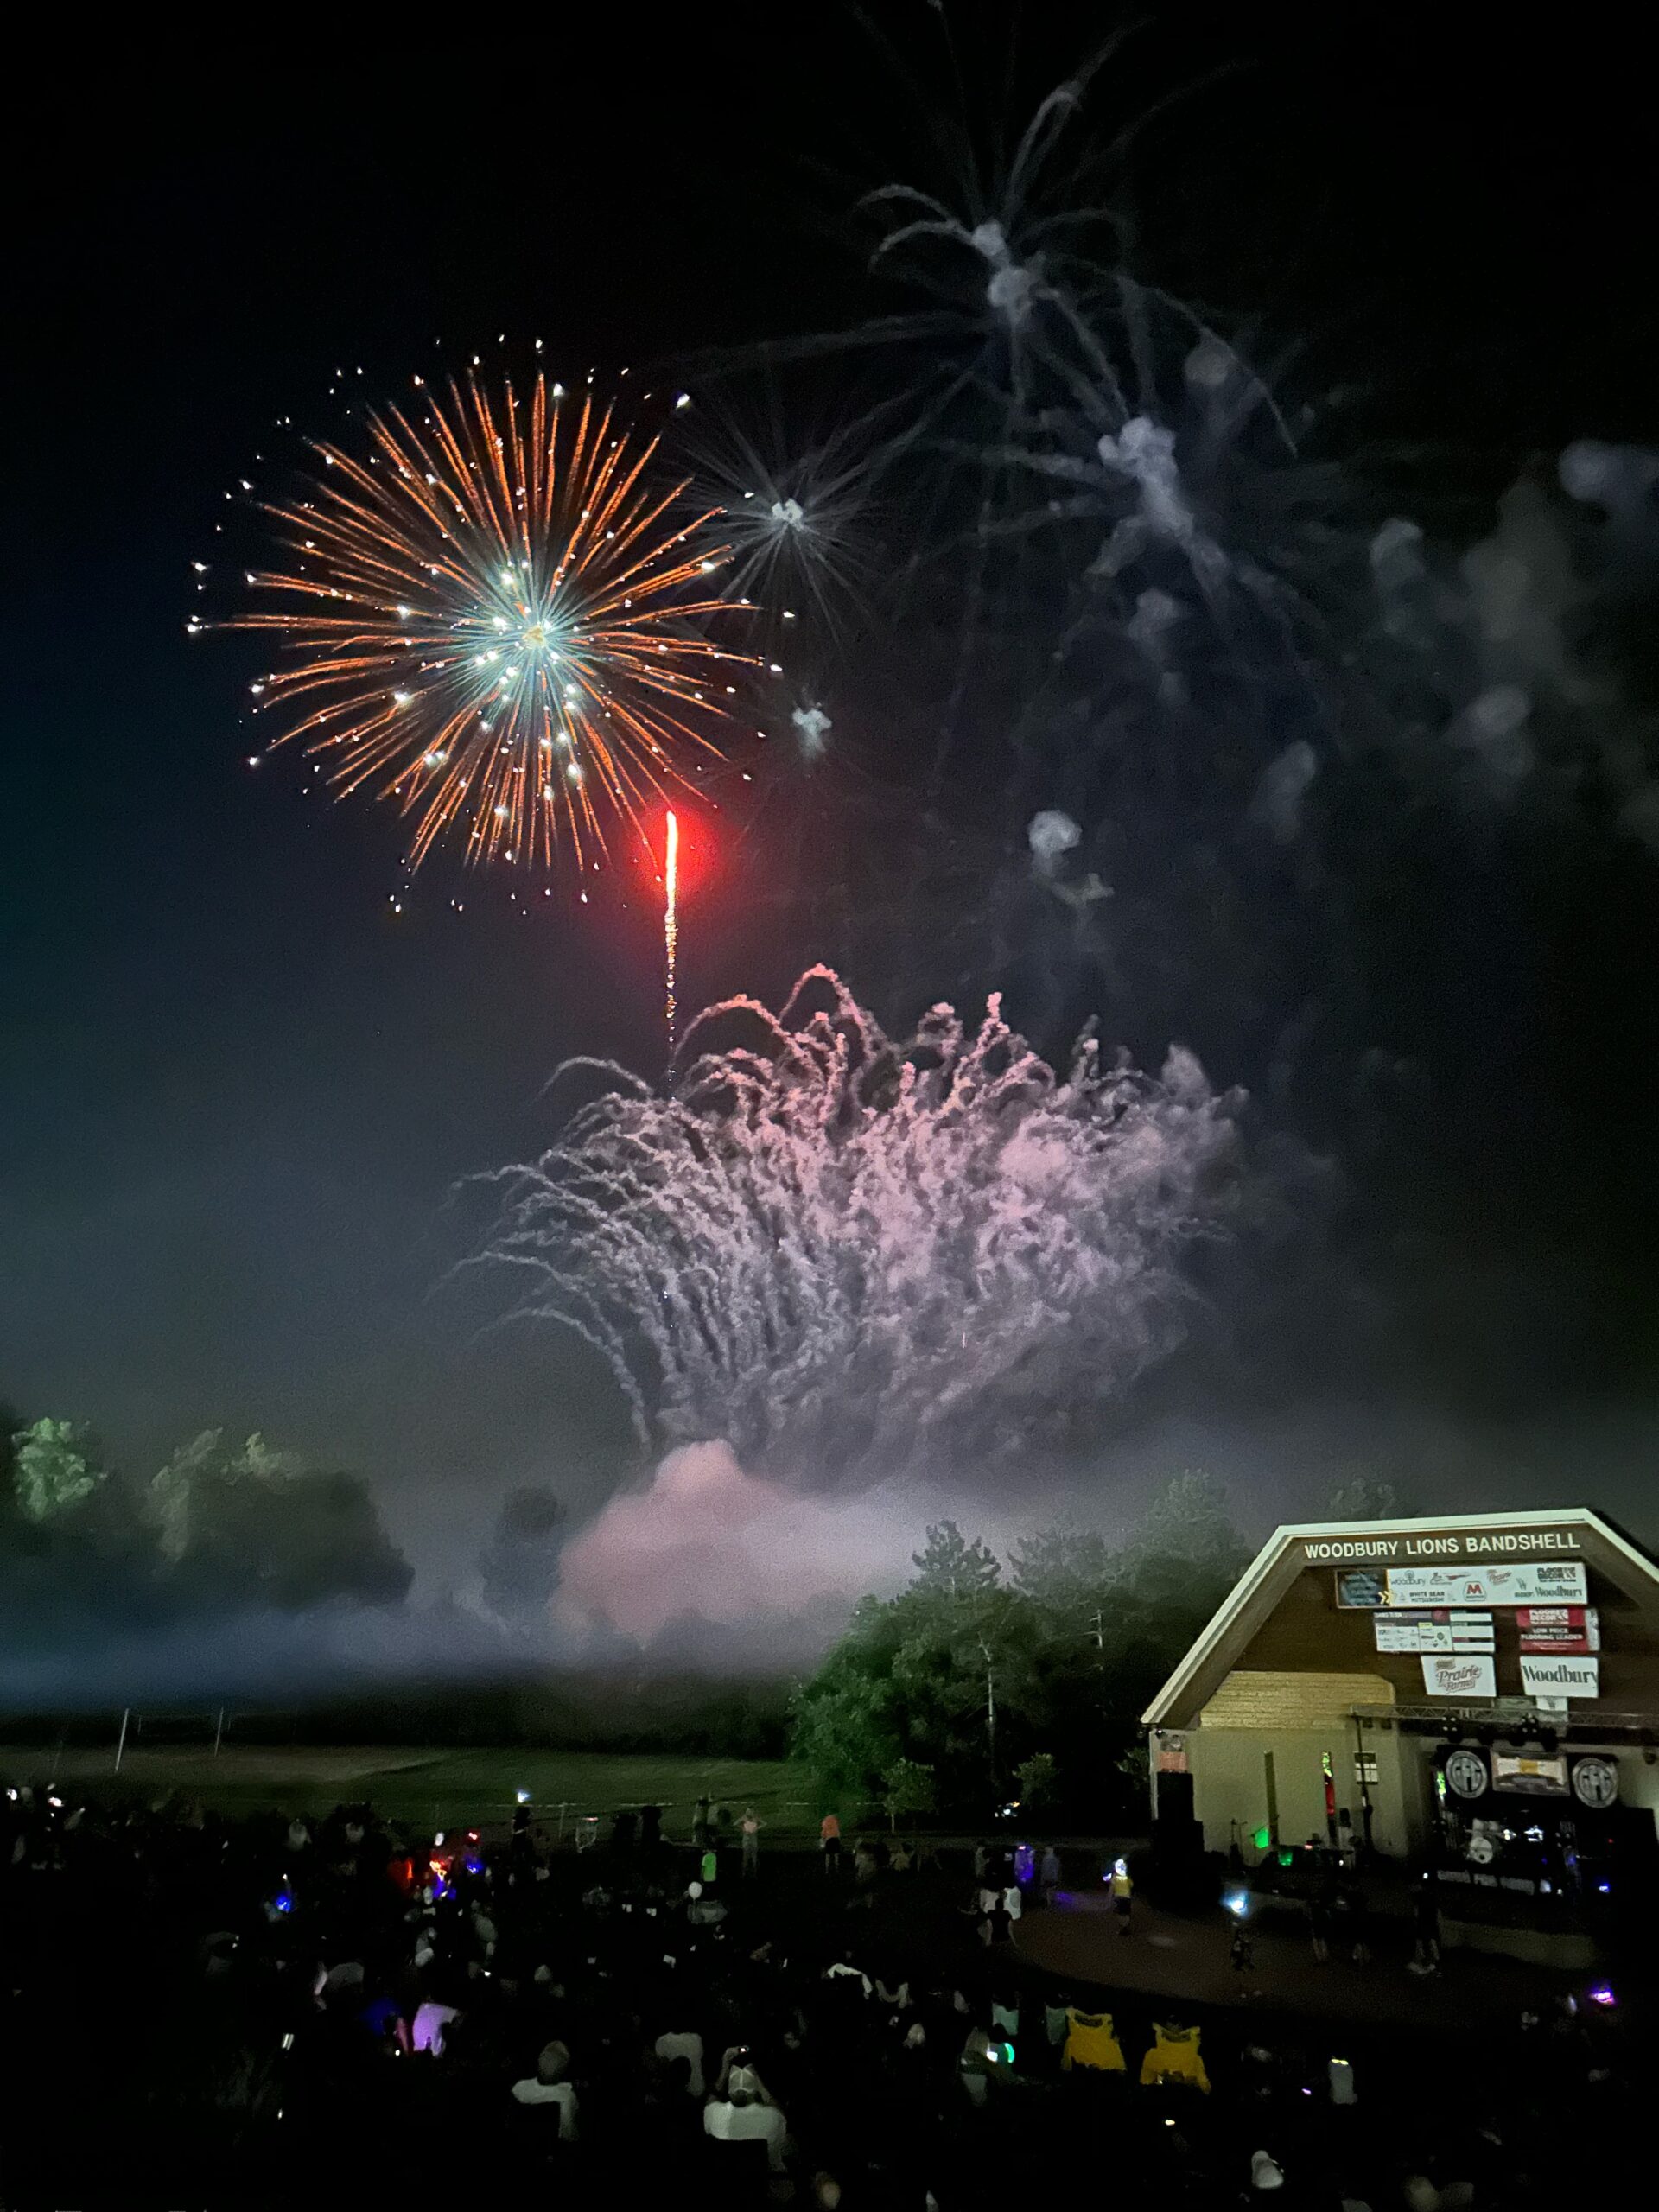 Fireworks at Woodbury Days Set the Mood by Roger Green